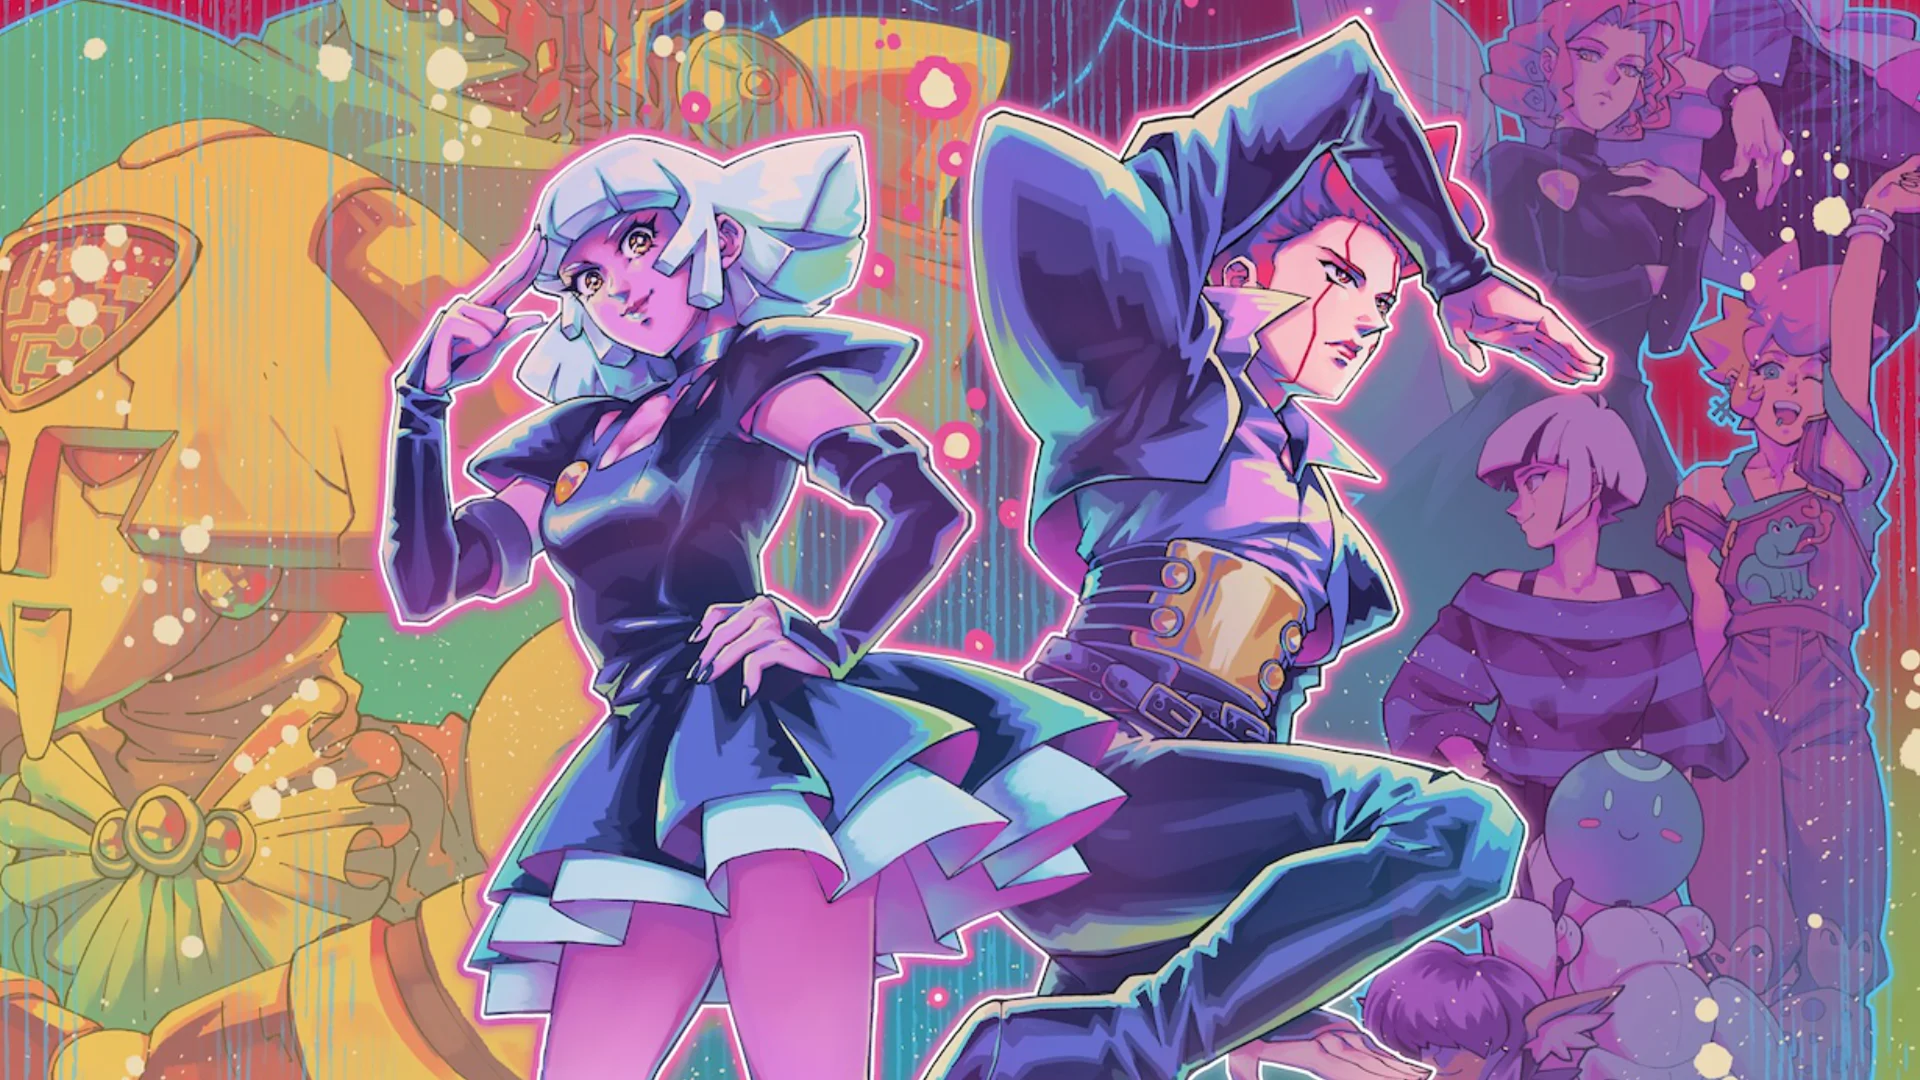 Read Only Memories: NEURODIVER Featured Artwork